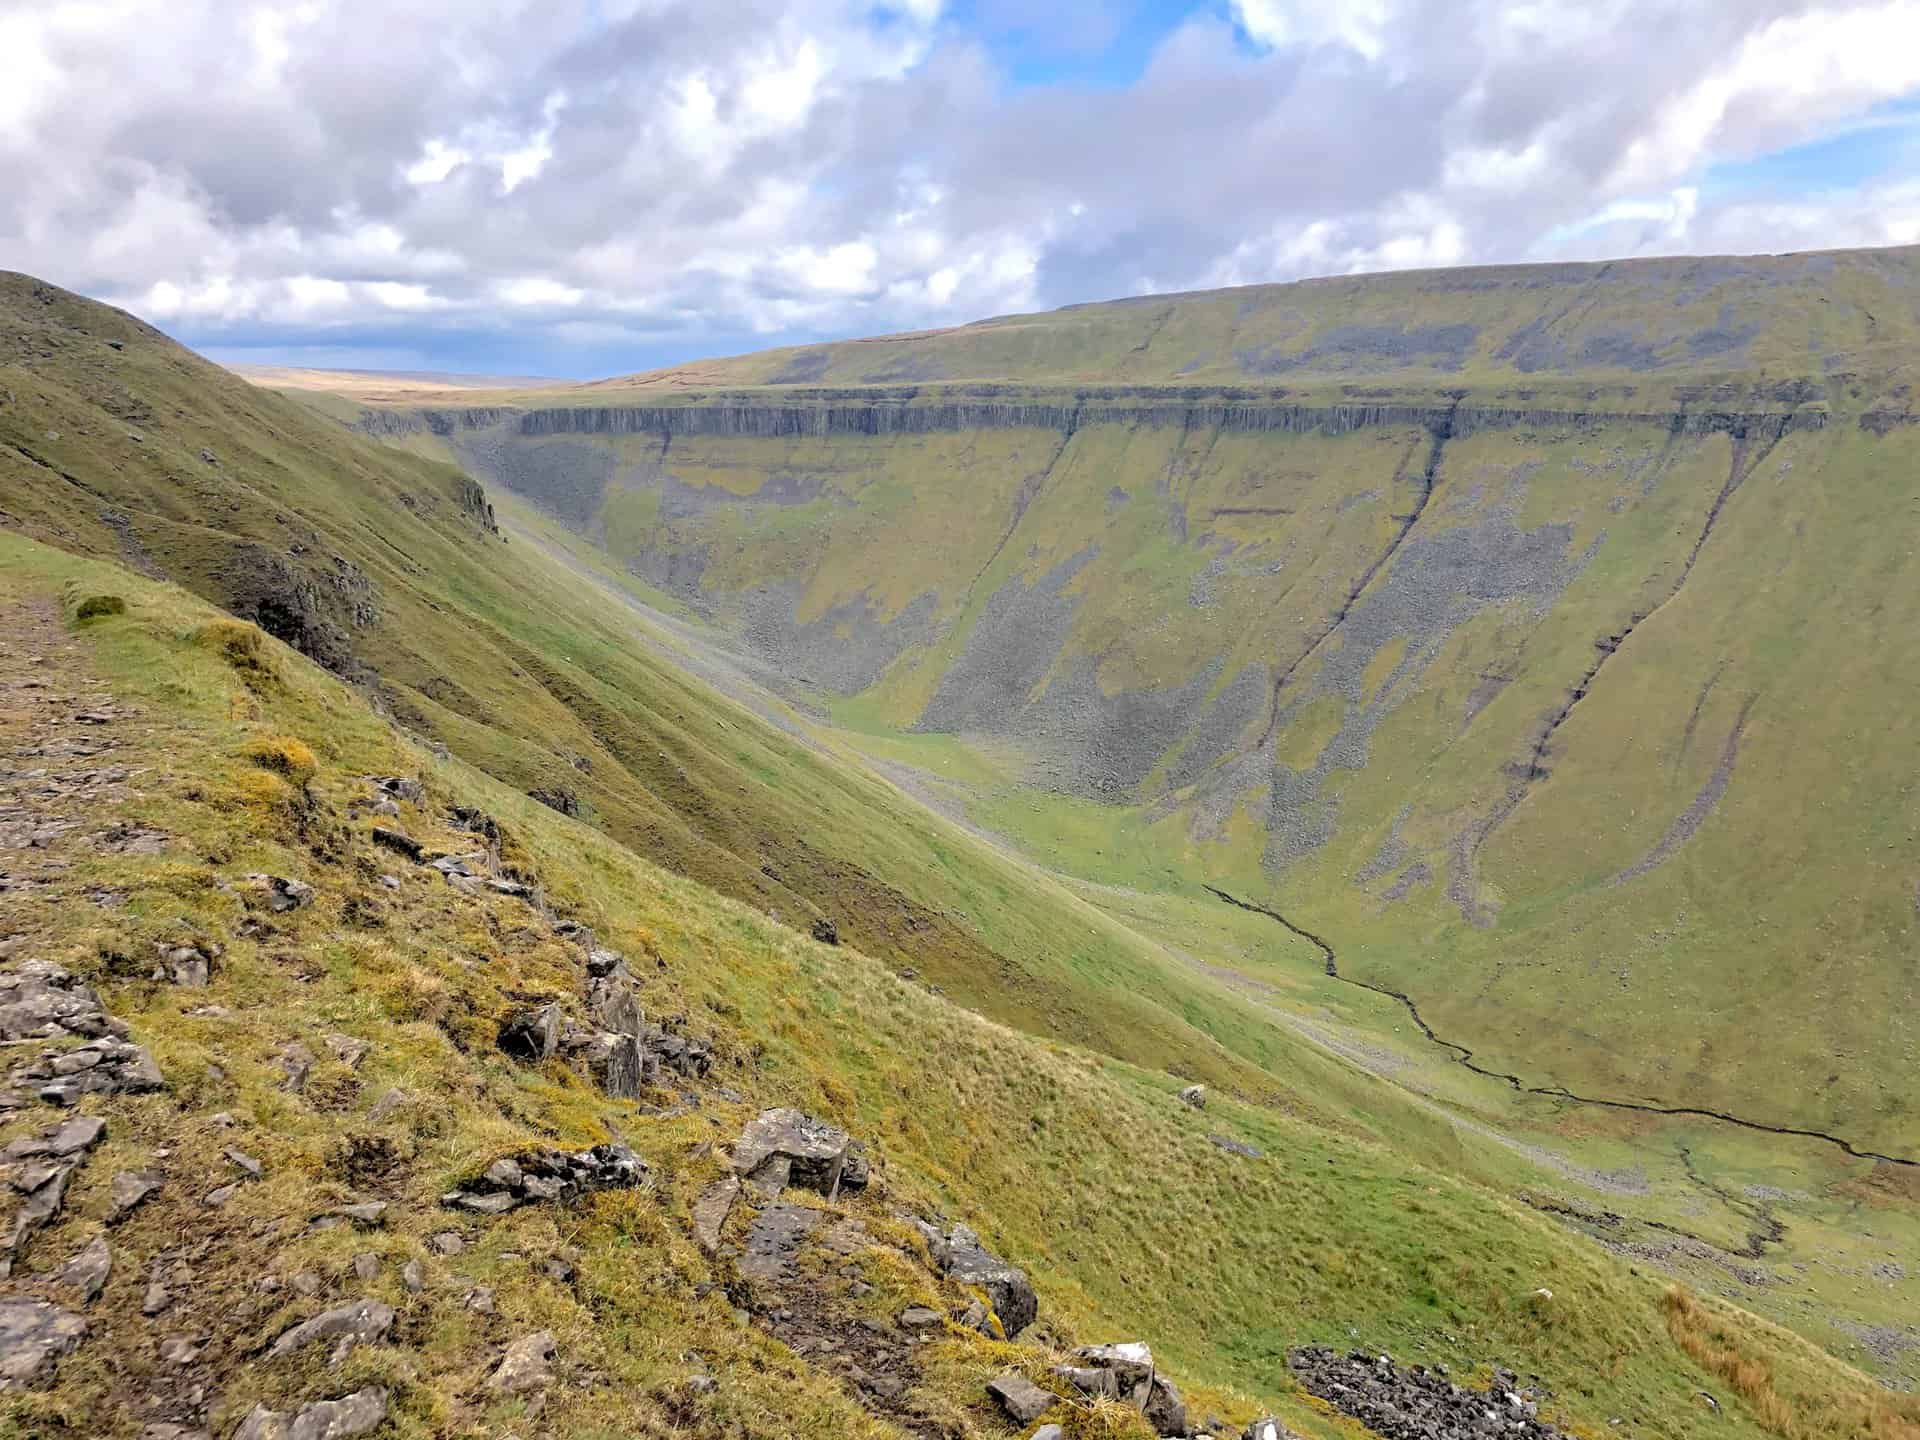 Our first glimpse of the High Cup Gill valley.